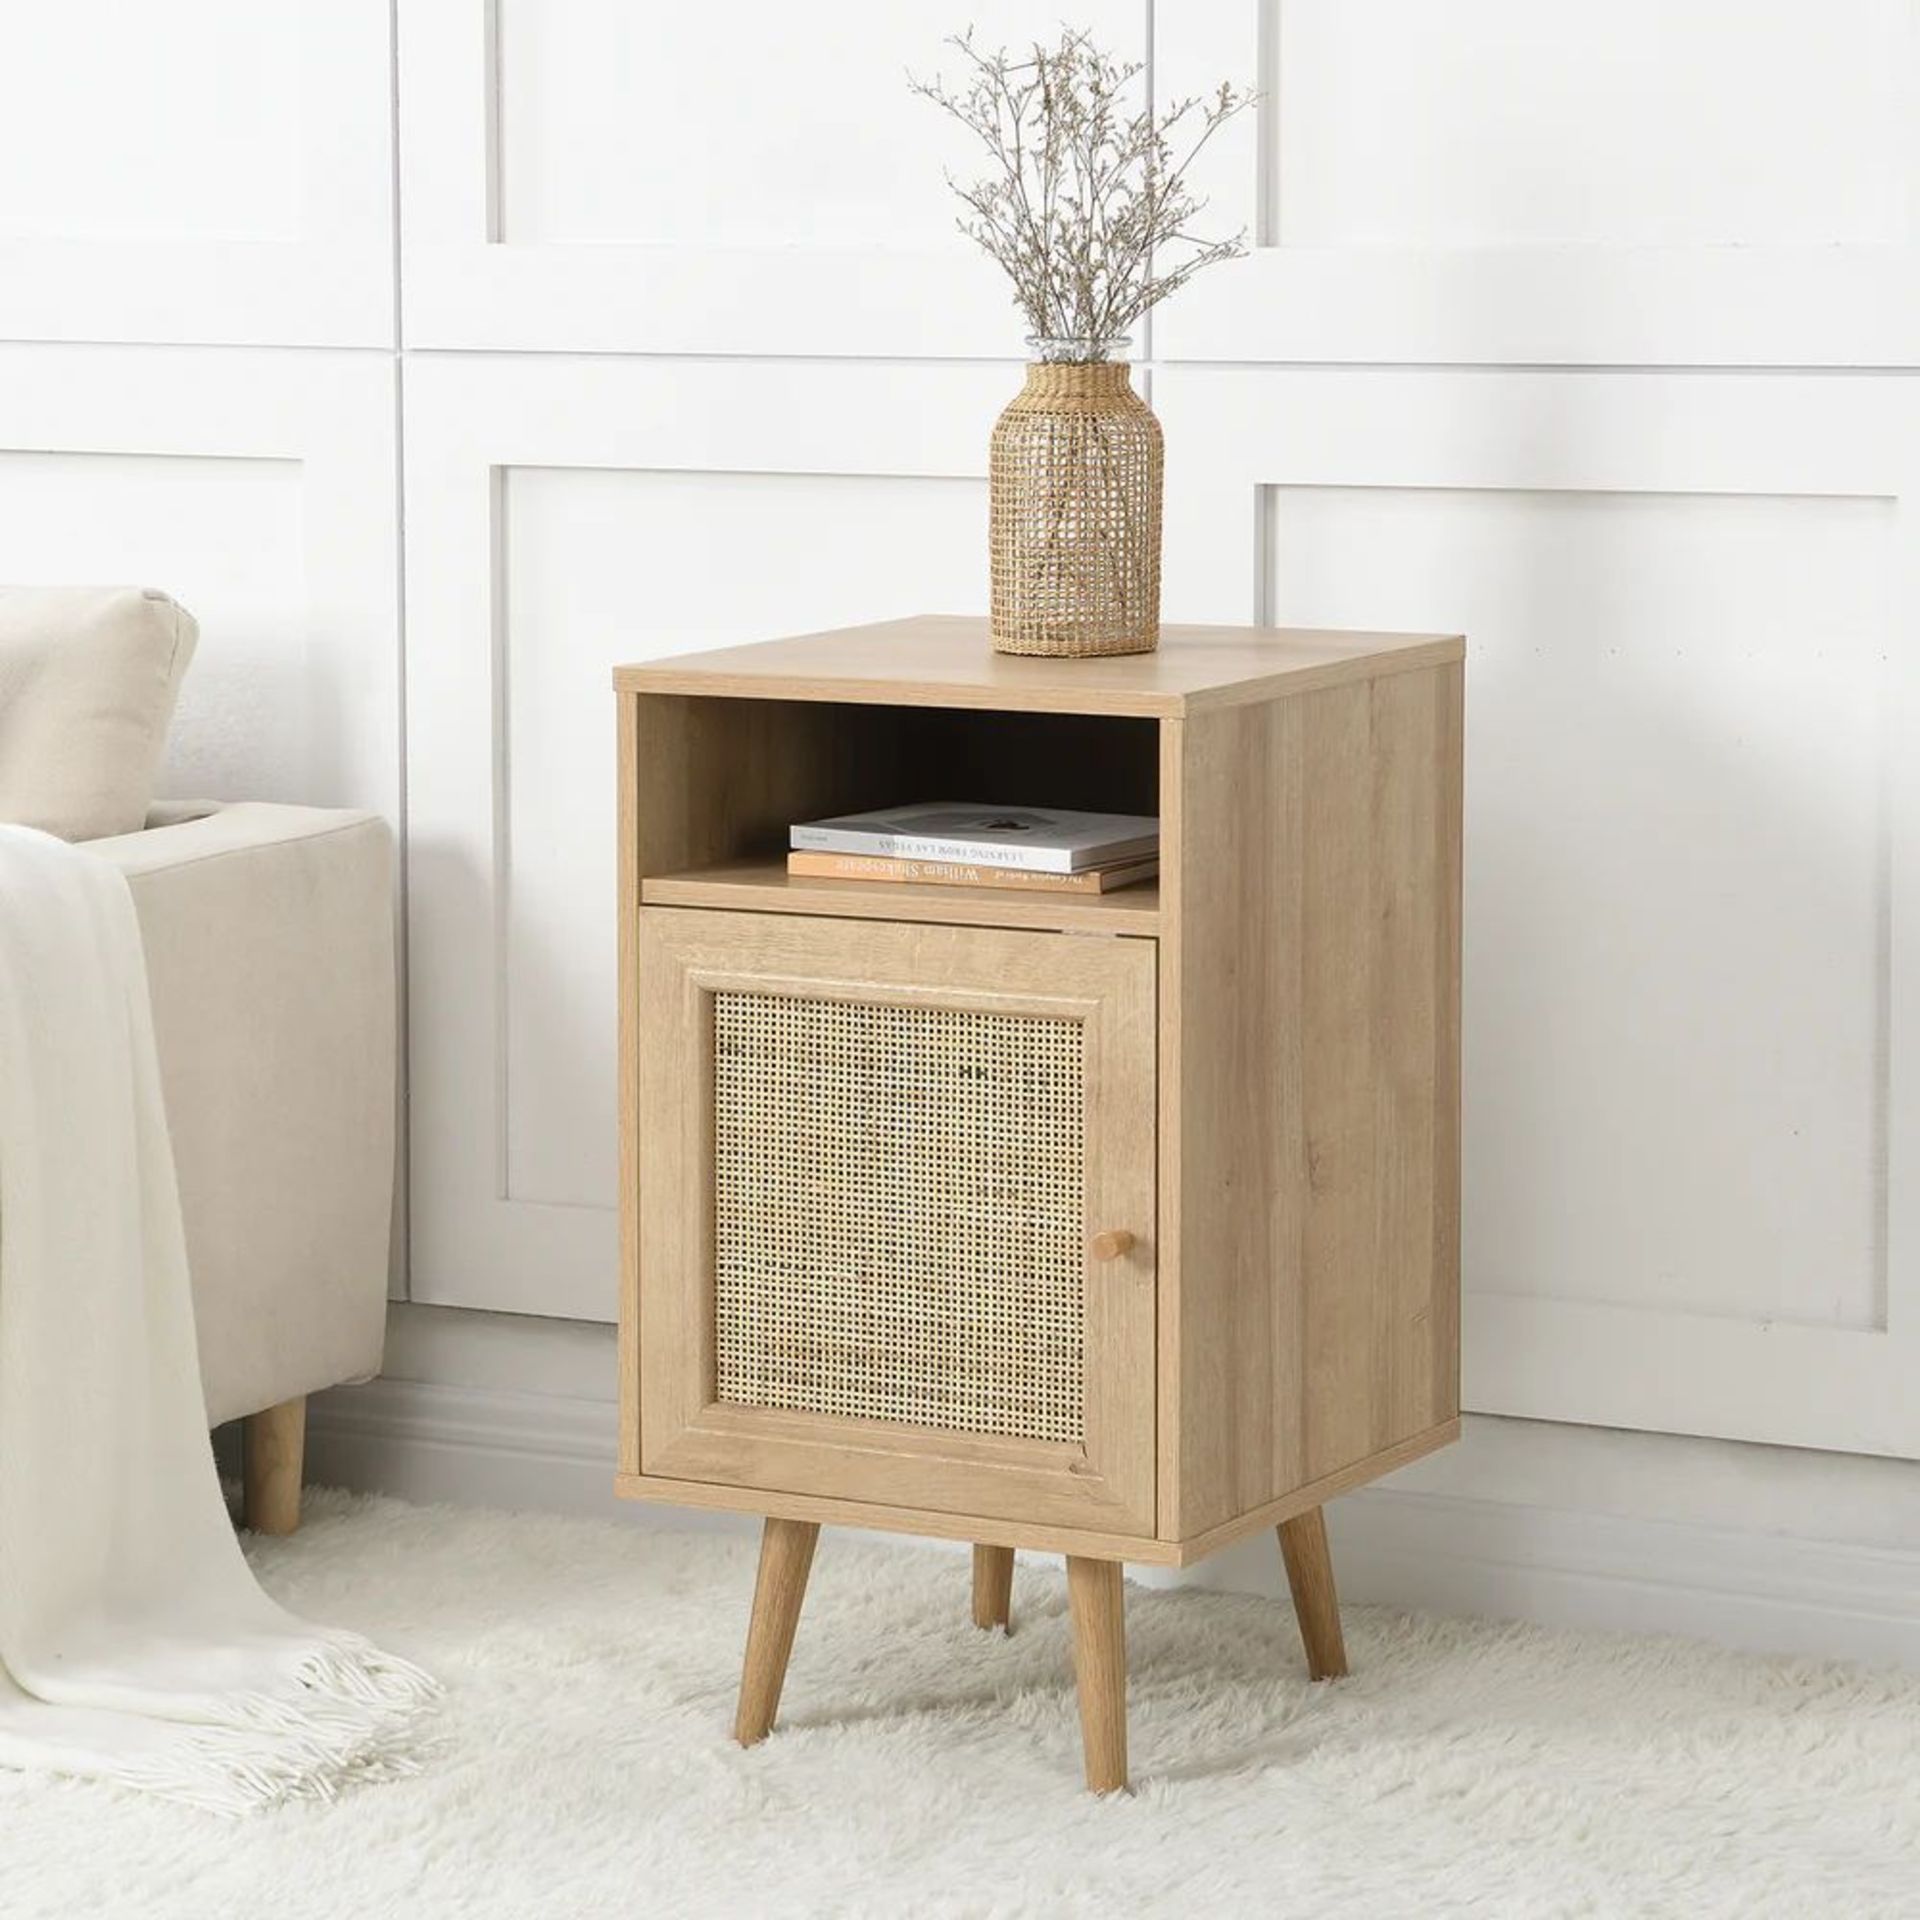 Frances Woven Rattan 1-Door Bedside Table in Natural Colour. - ER29. RRP £149.99. Our Frances - Image 3 of 4